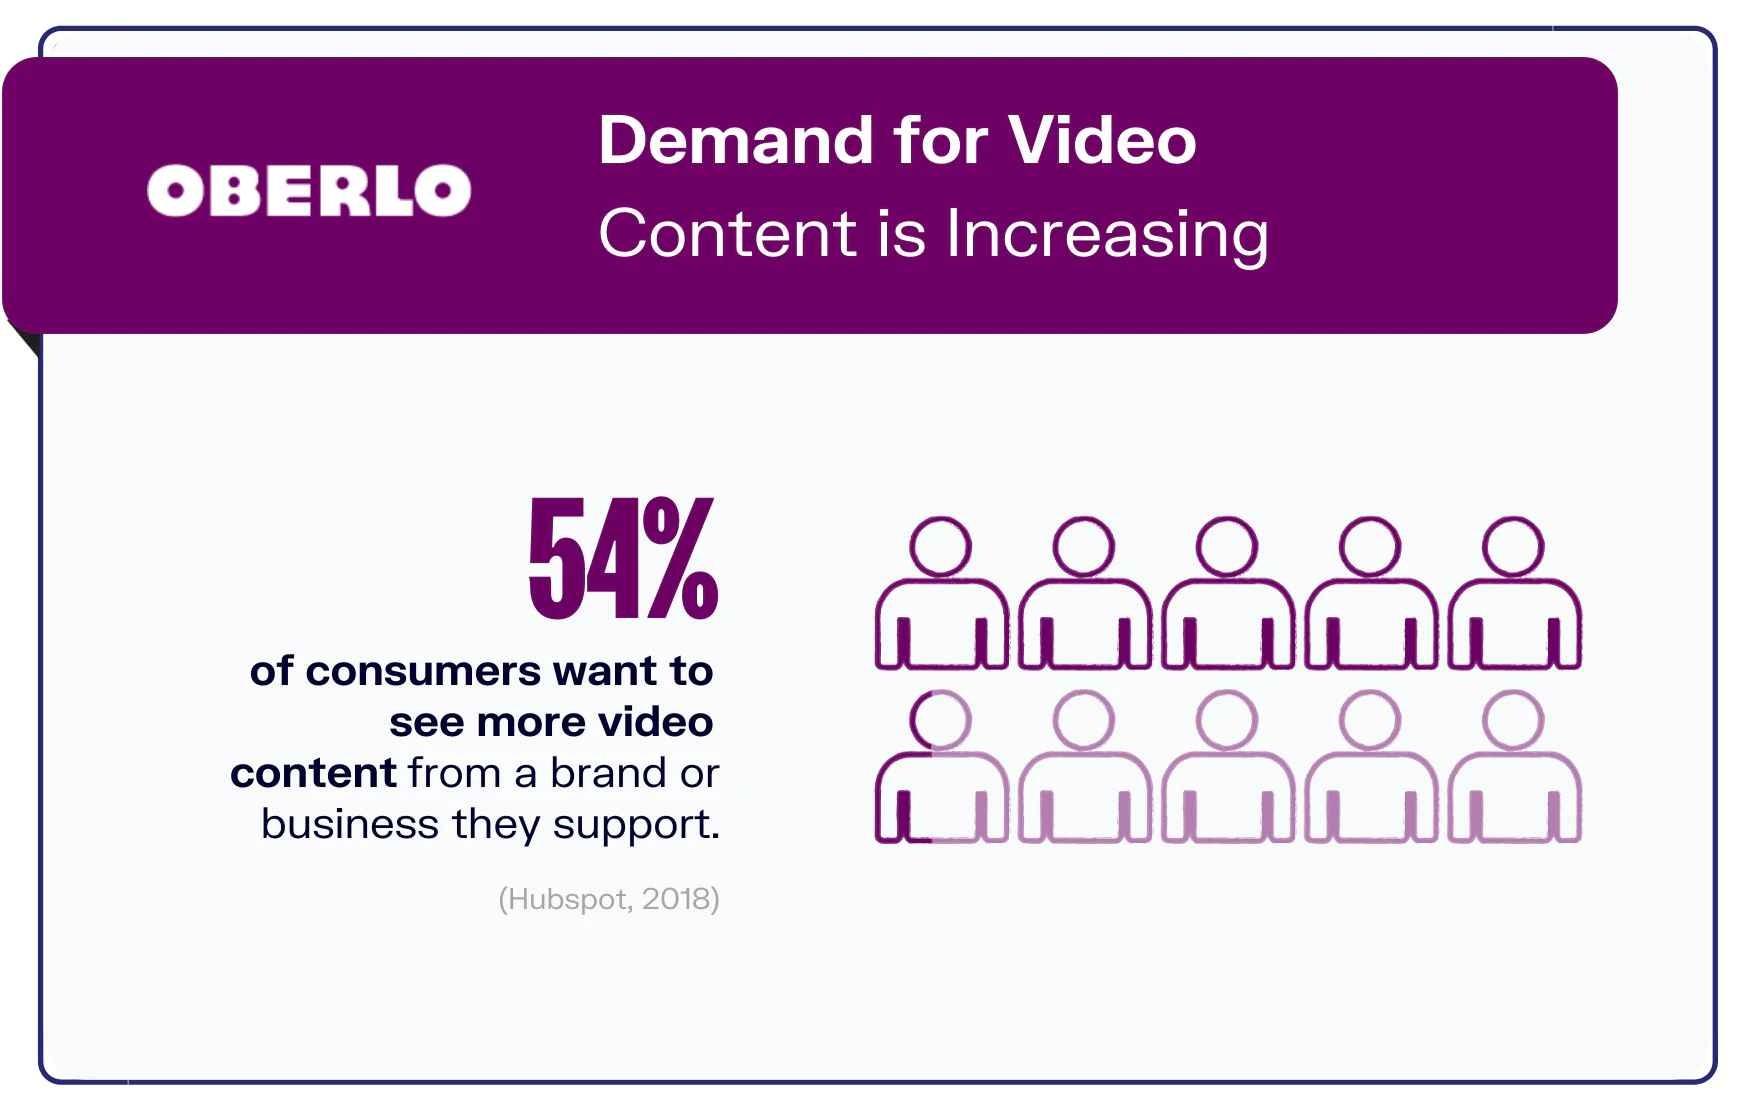 Scope of Digital Marketing in UAE - Increased Demand for Video Content